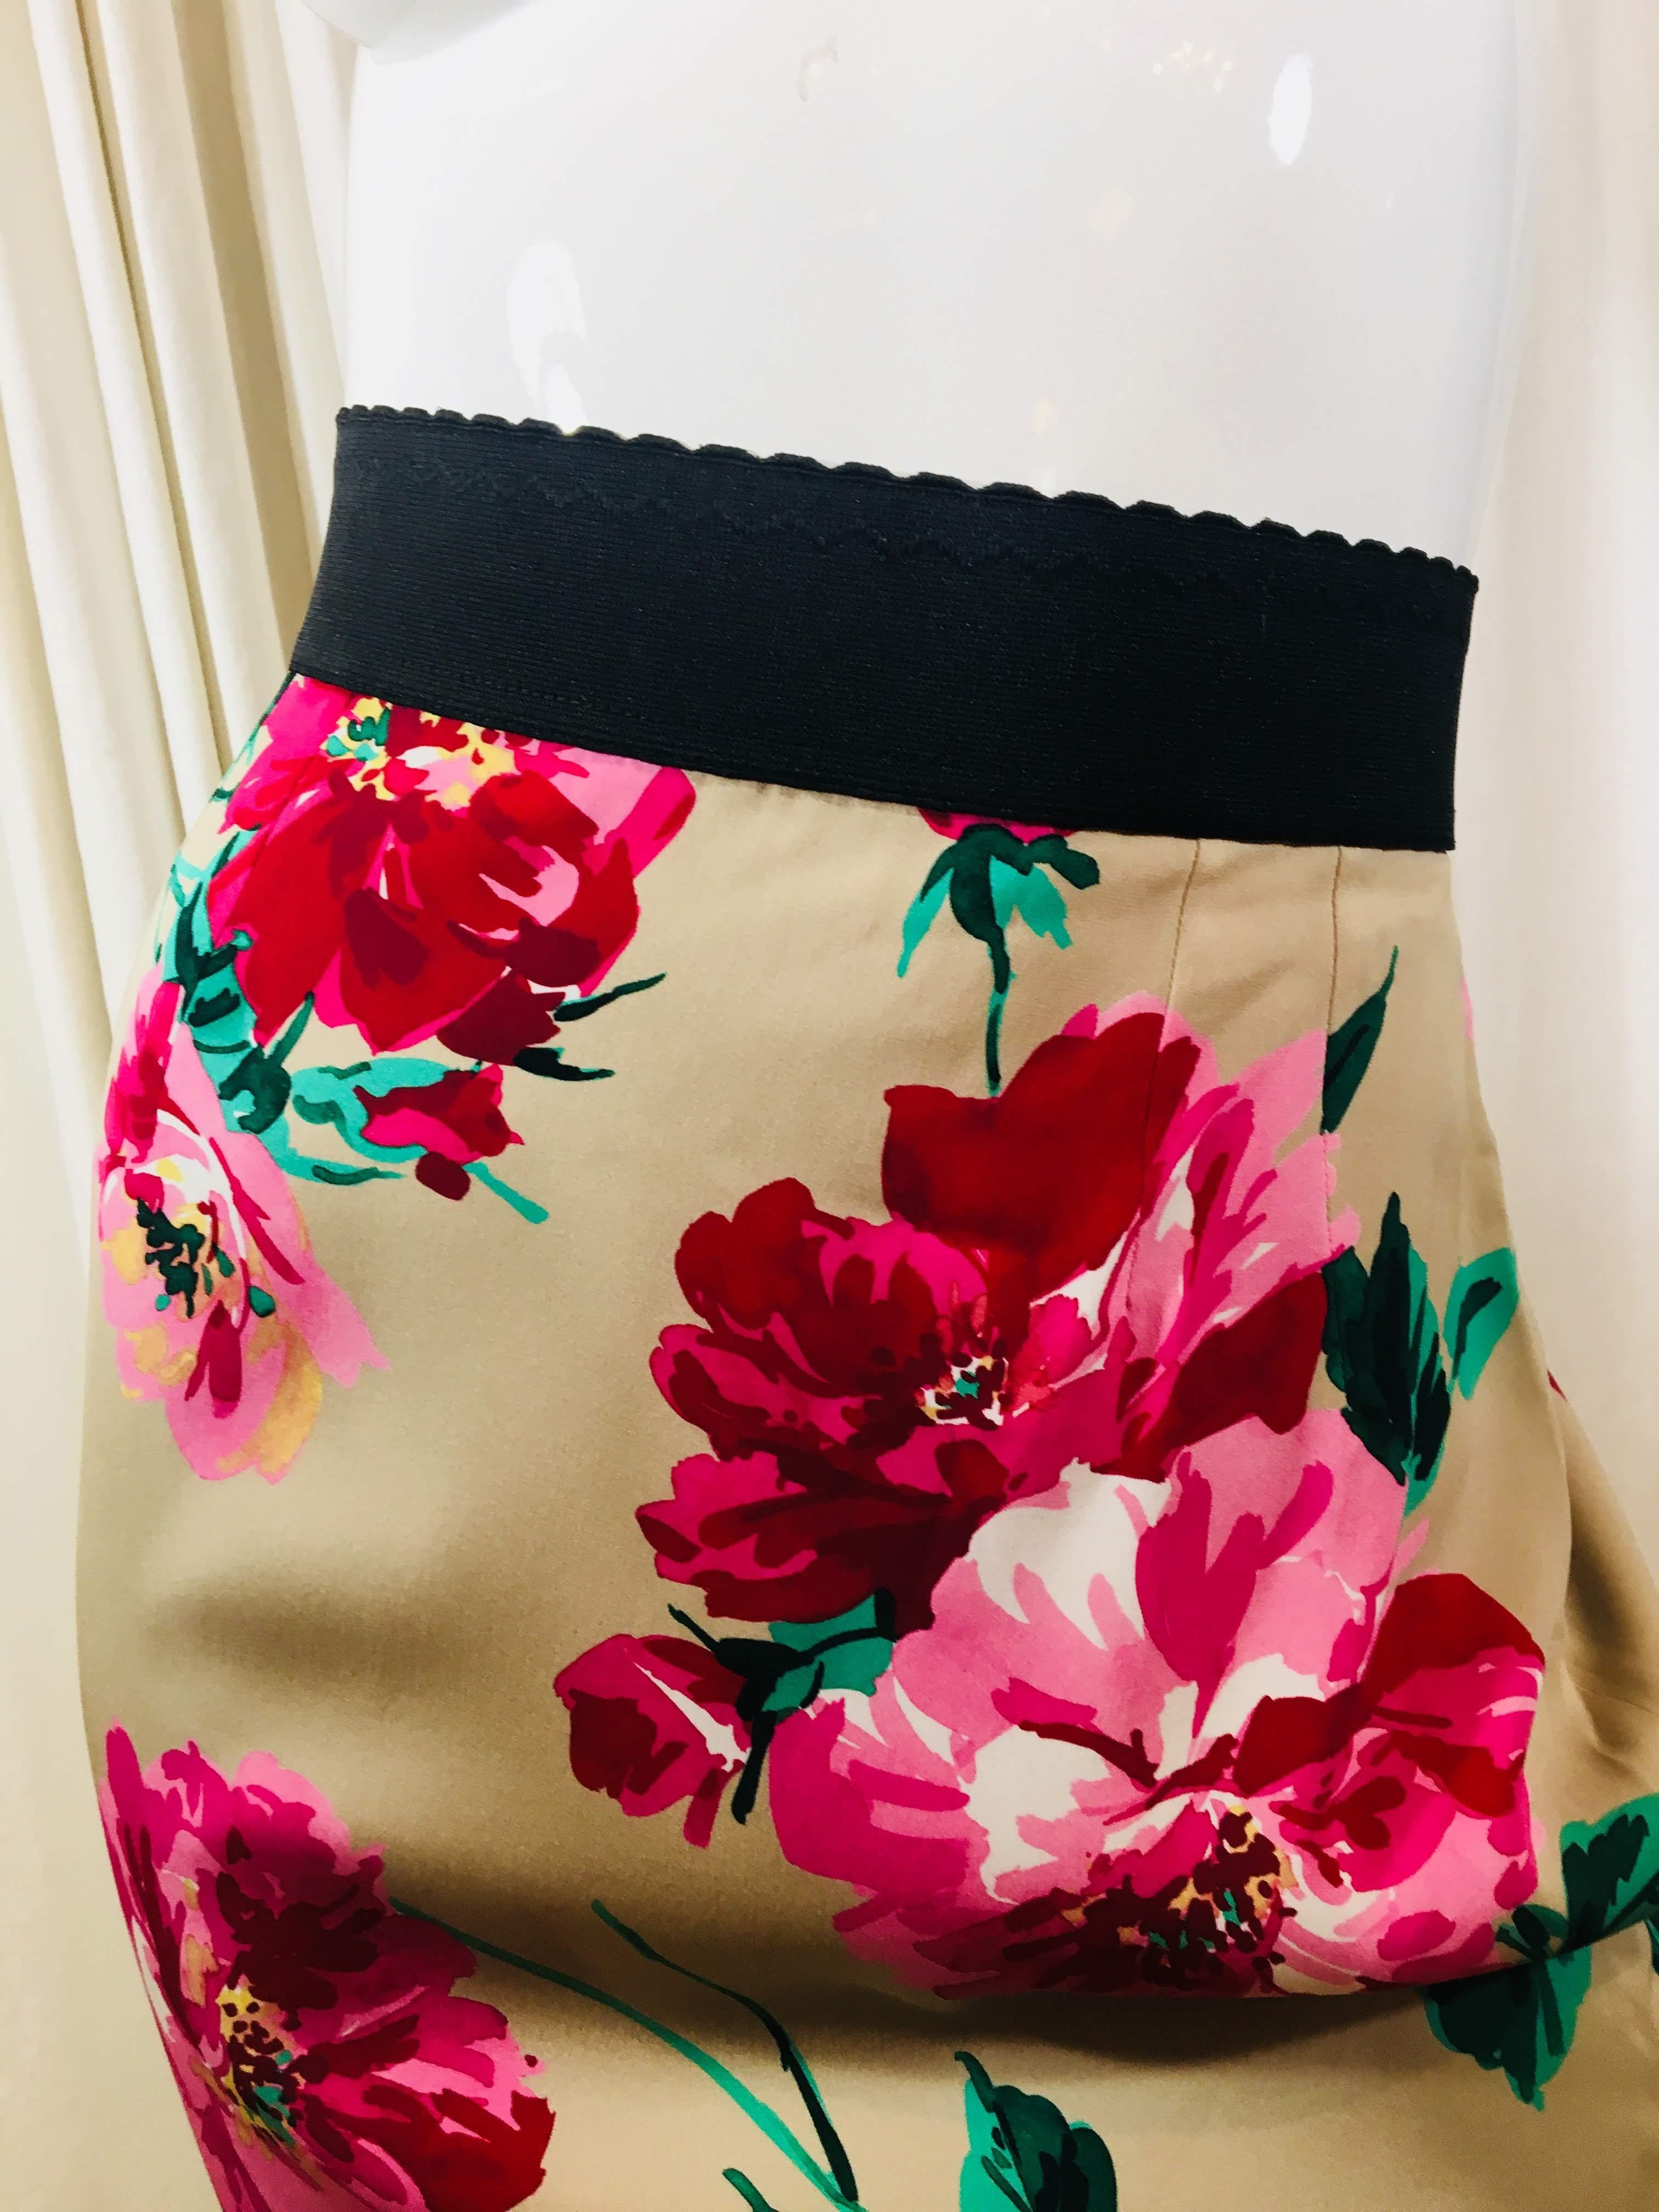 Dolce & Gabbana Silk Pencil Skirt, Thick Waistband with Mini-Scallop Cut.
Allover Floral Print, Back Slit and Back Zipper. 